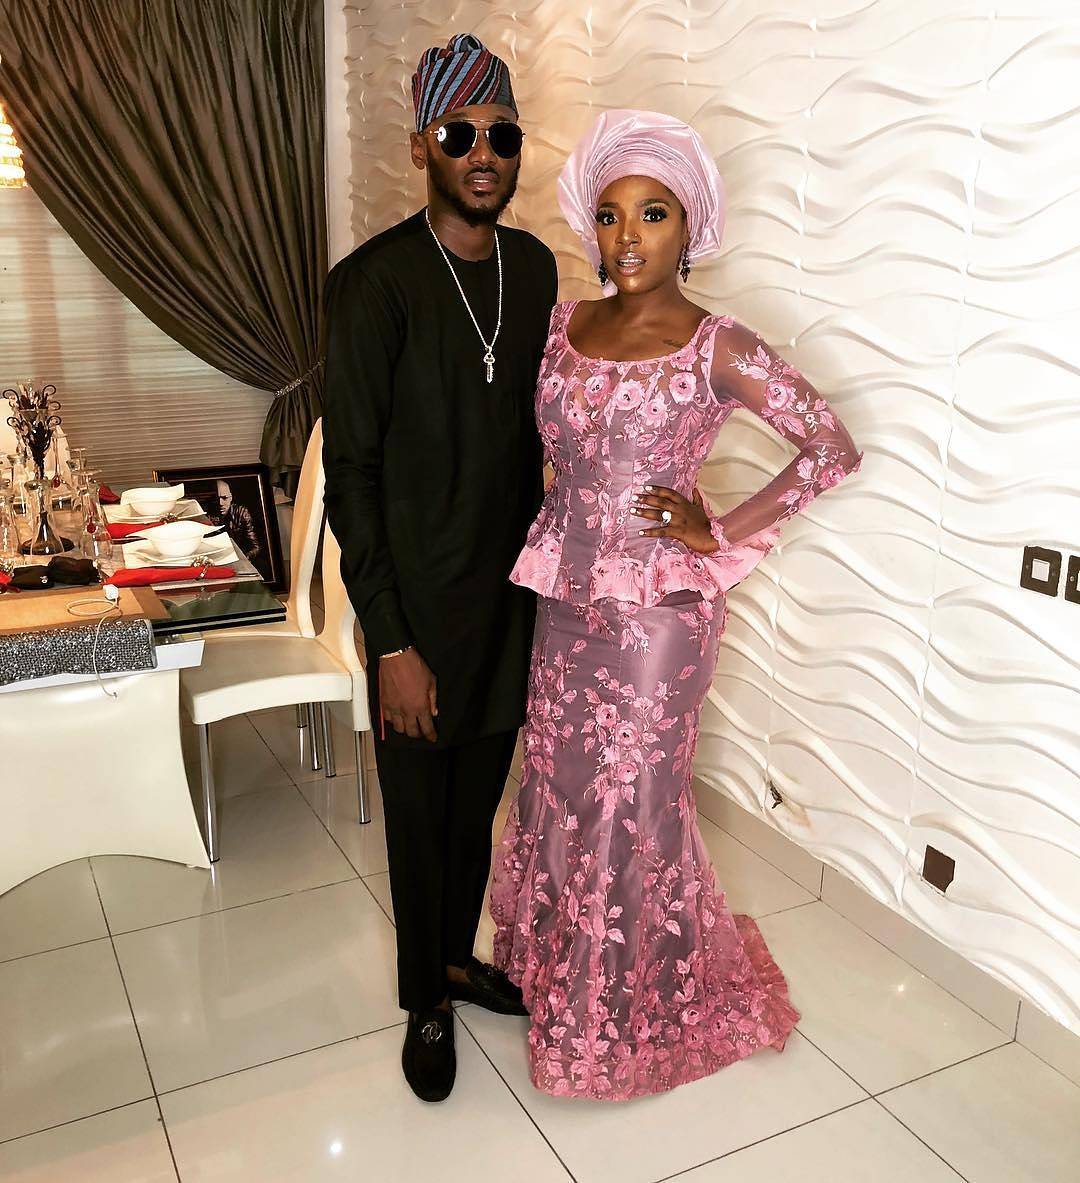 Image result for 2face and wife at Adesua Etomi and Banky W's traditional marriage ceremony in Lagos today